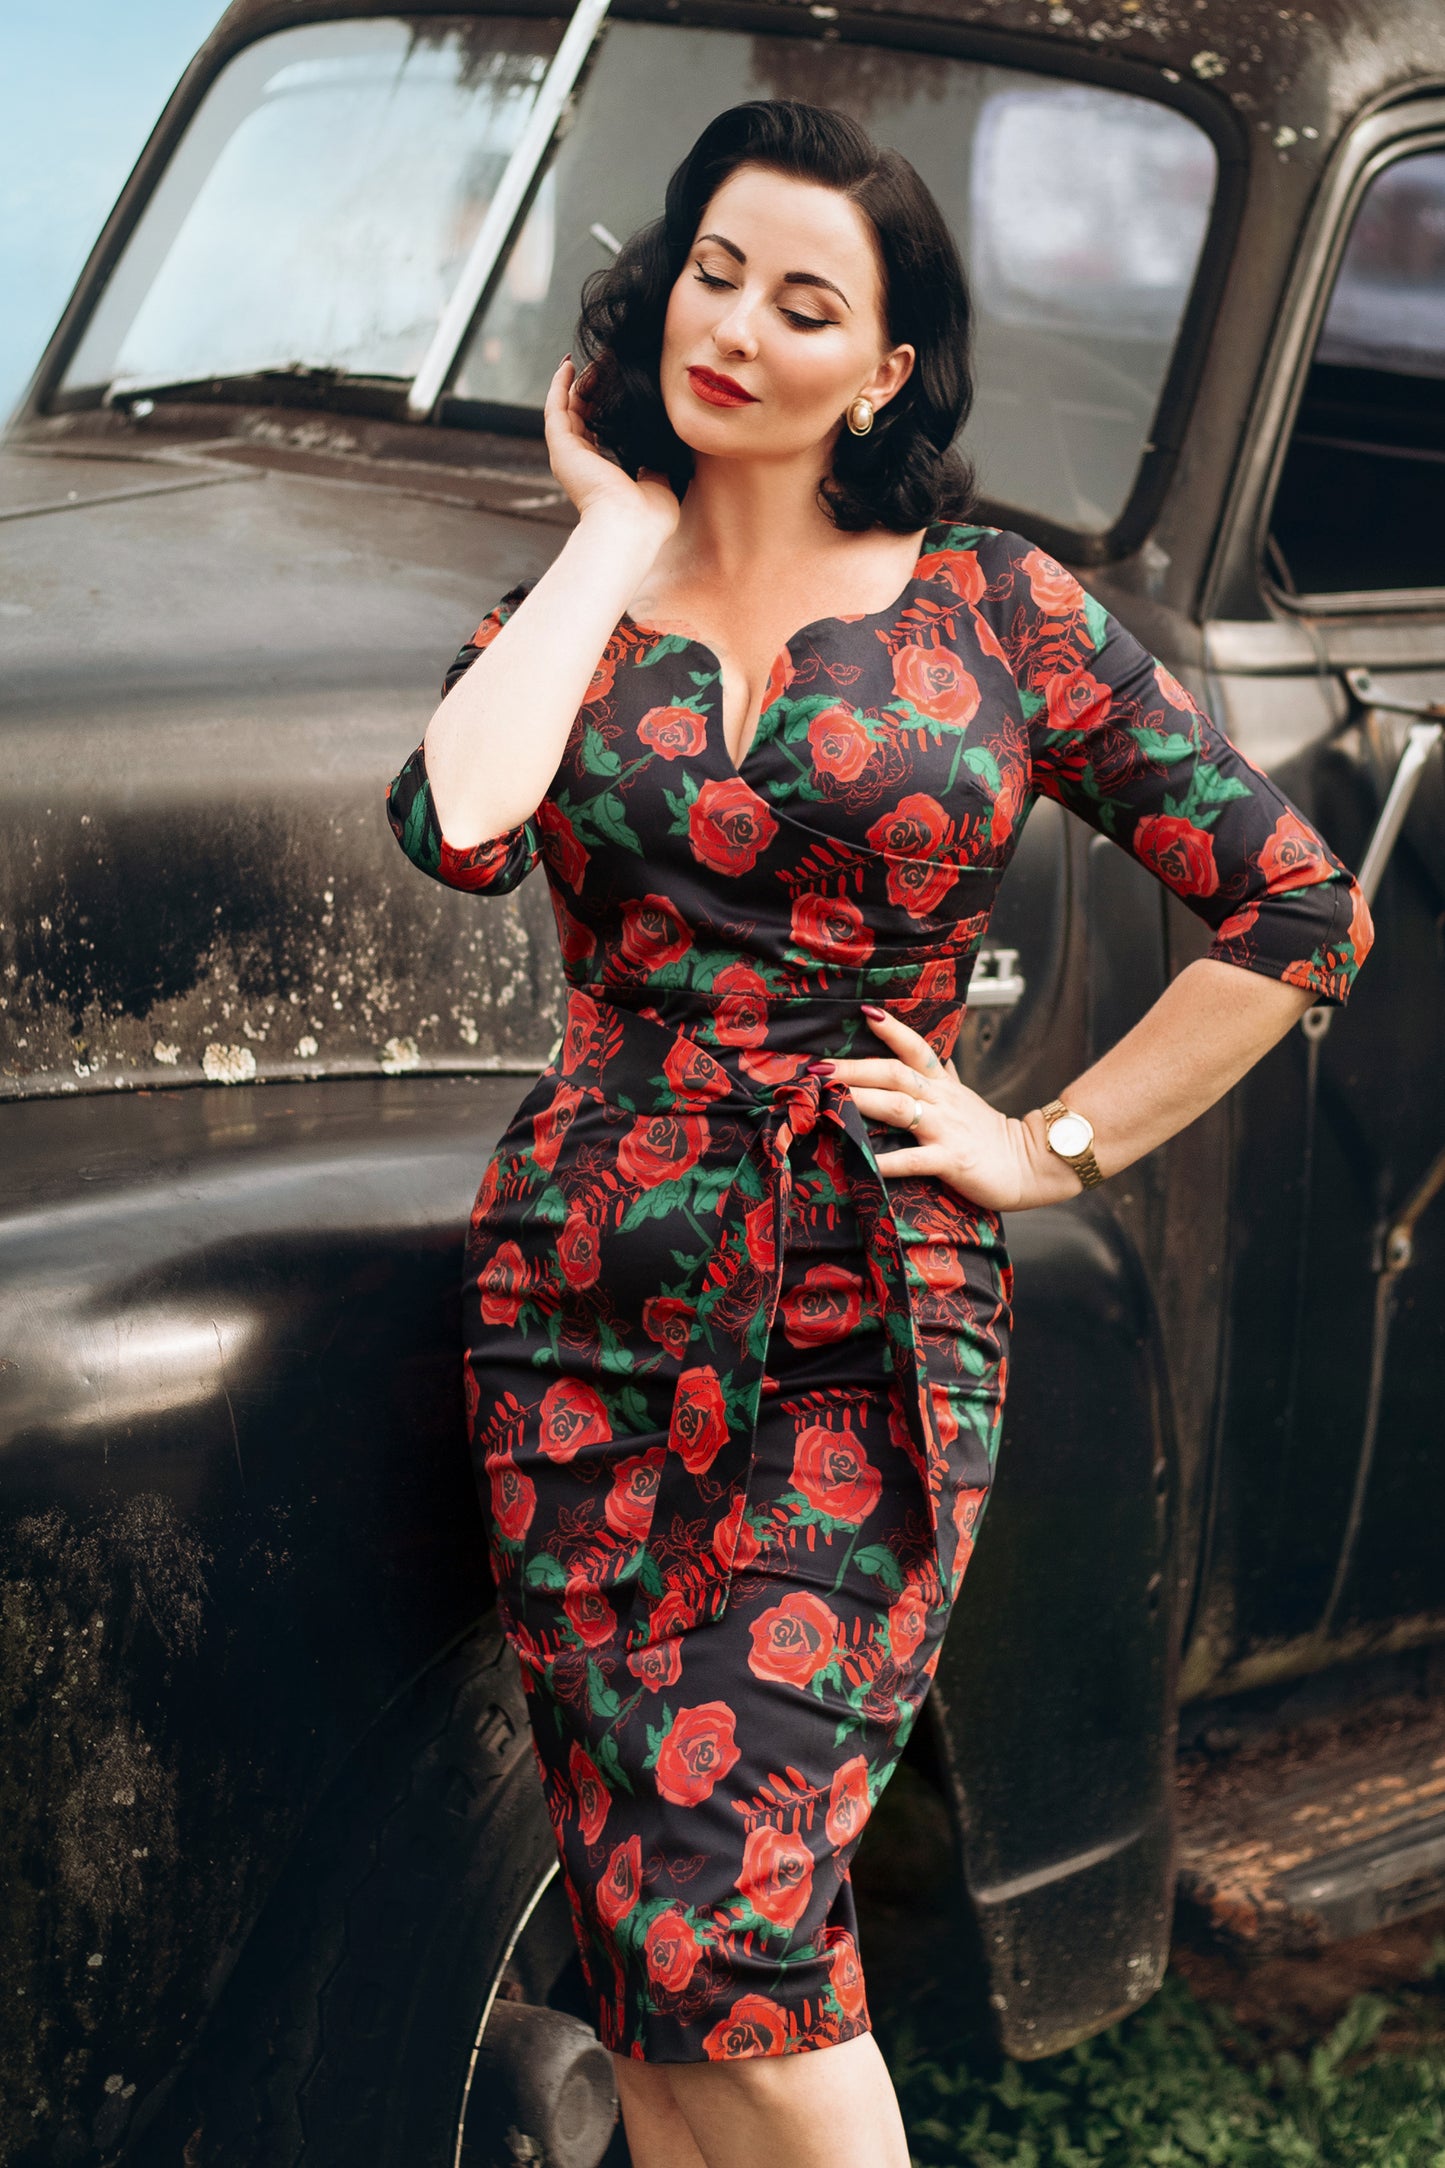 The Bombshell Roses Pencil Dress in Black